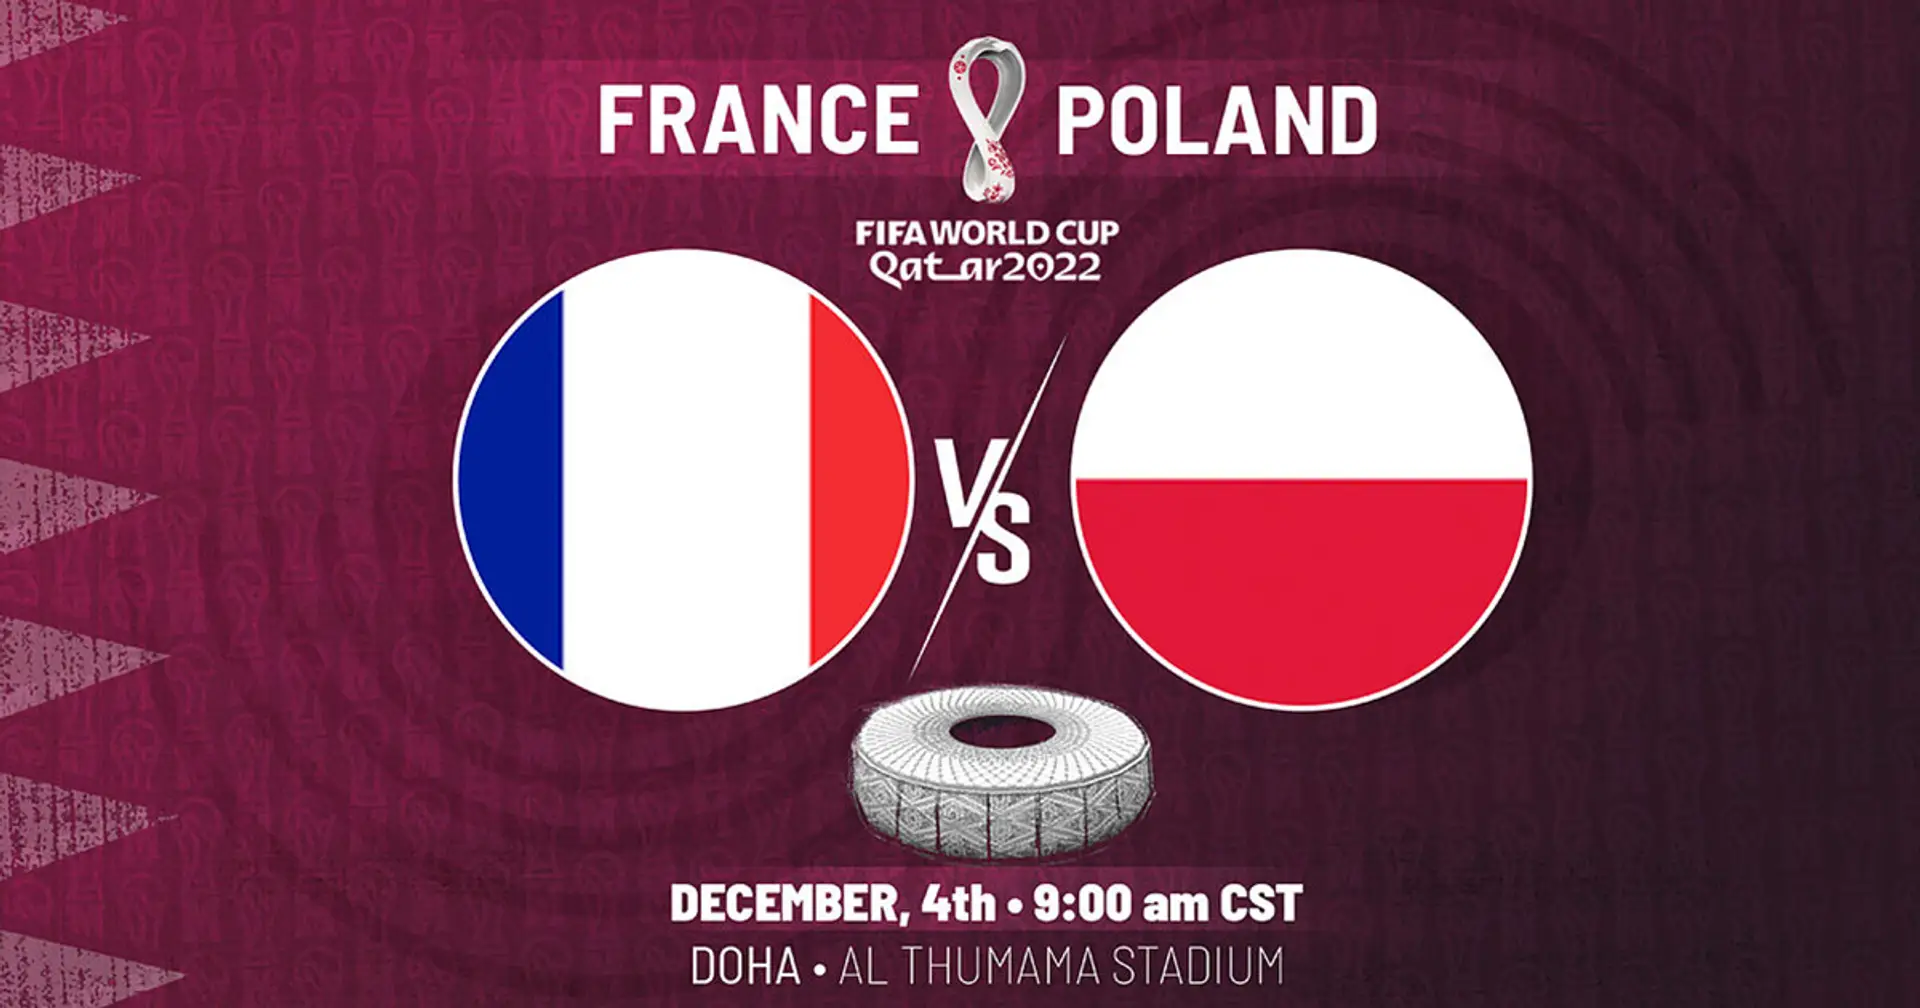 France v Poland: Official team lineups for the World Cup clash revealed